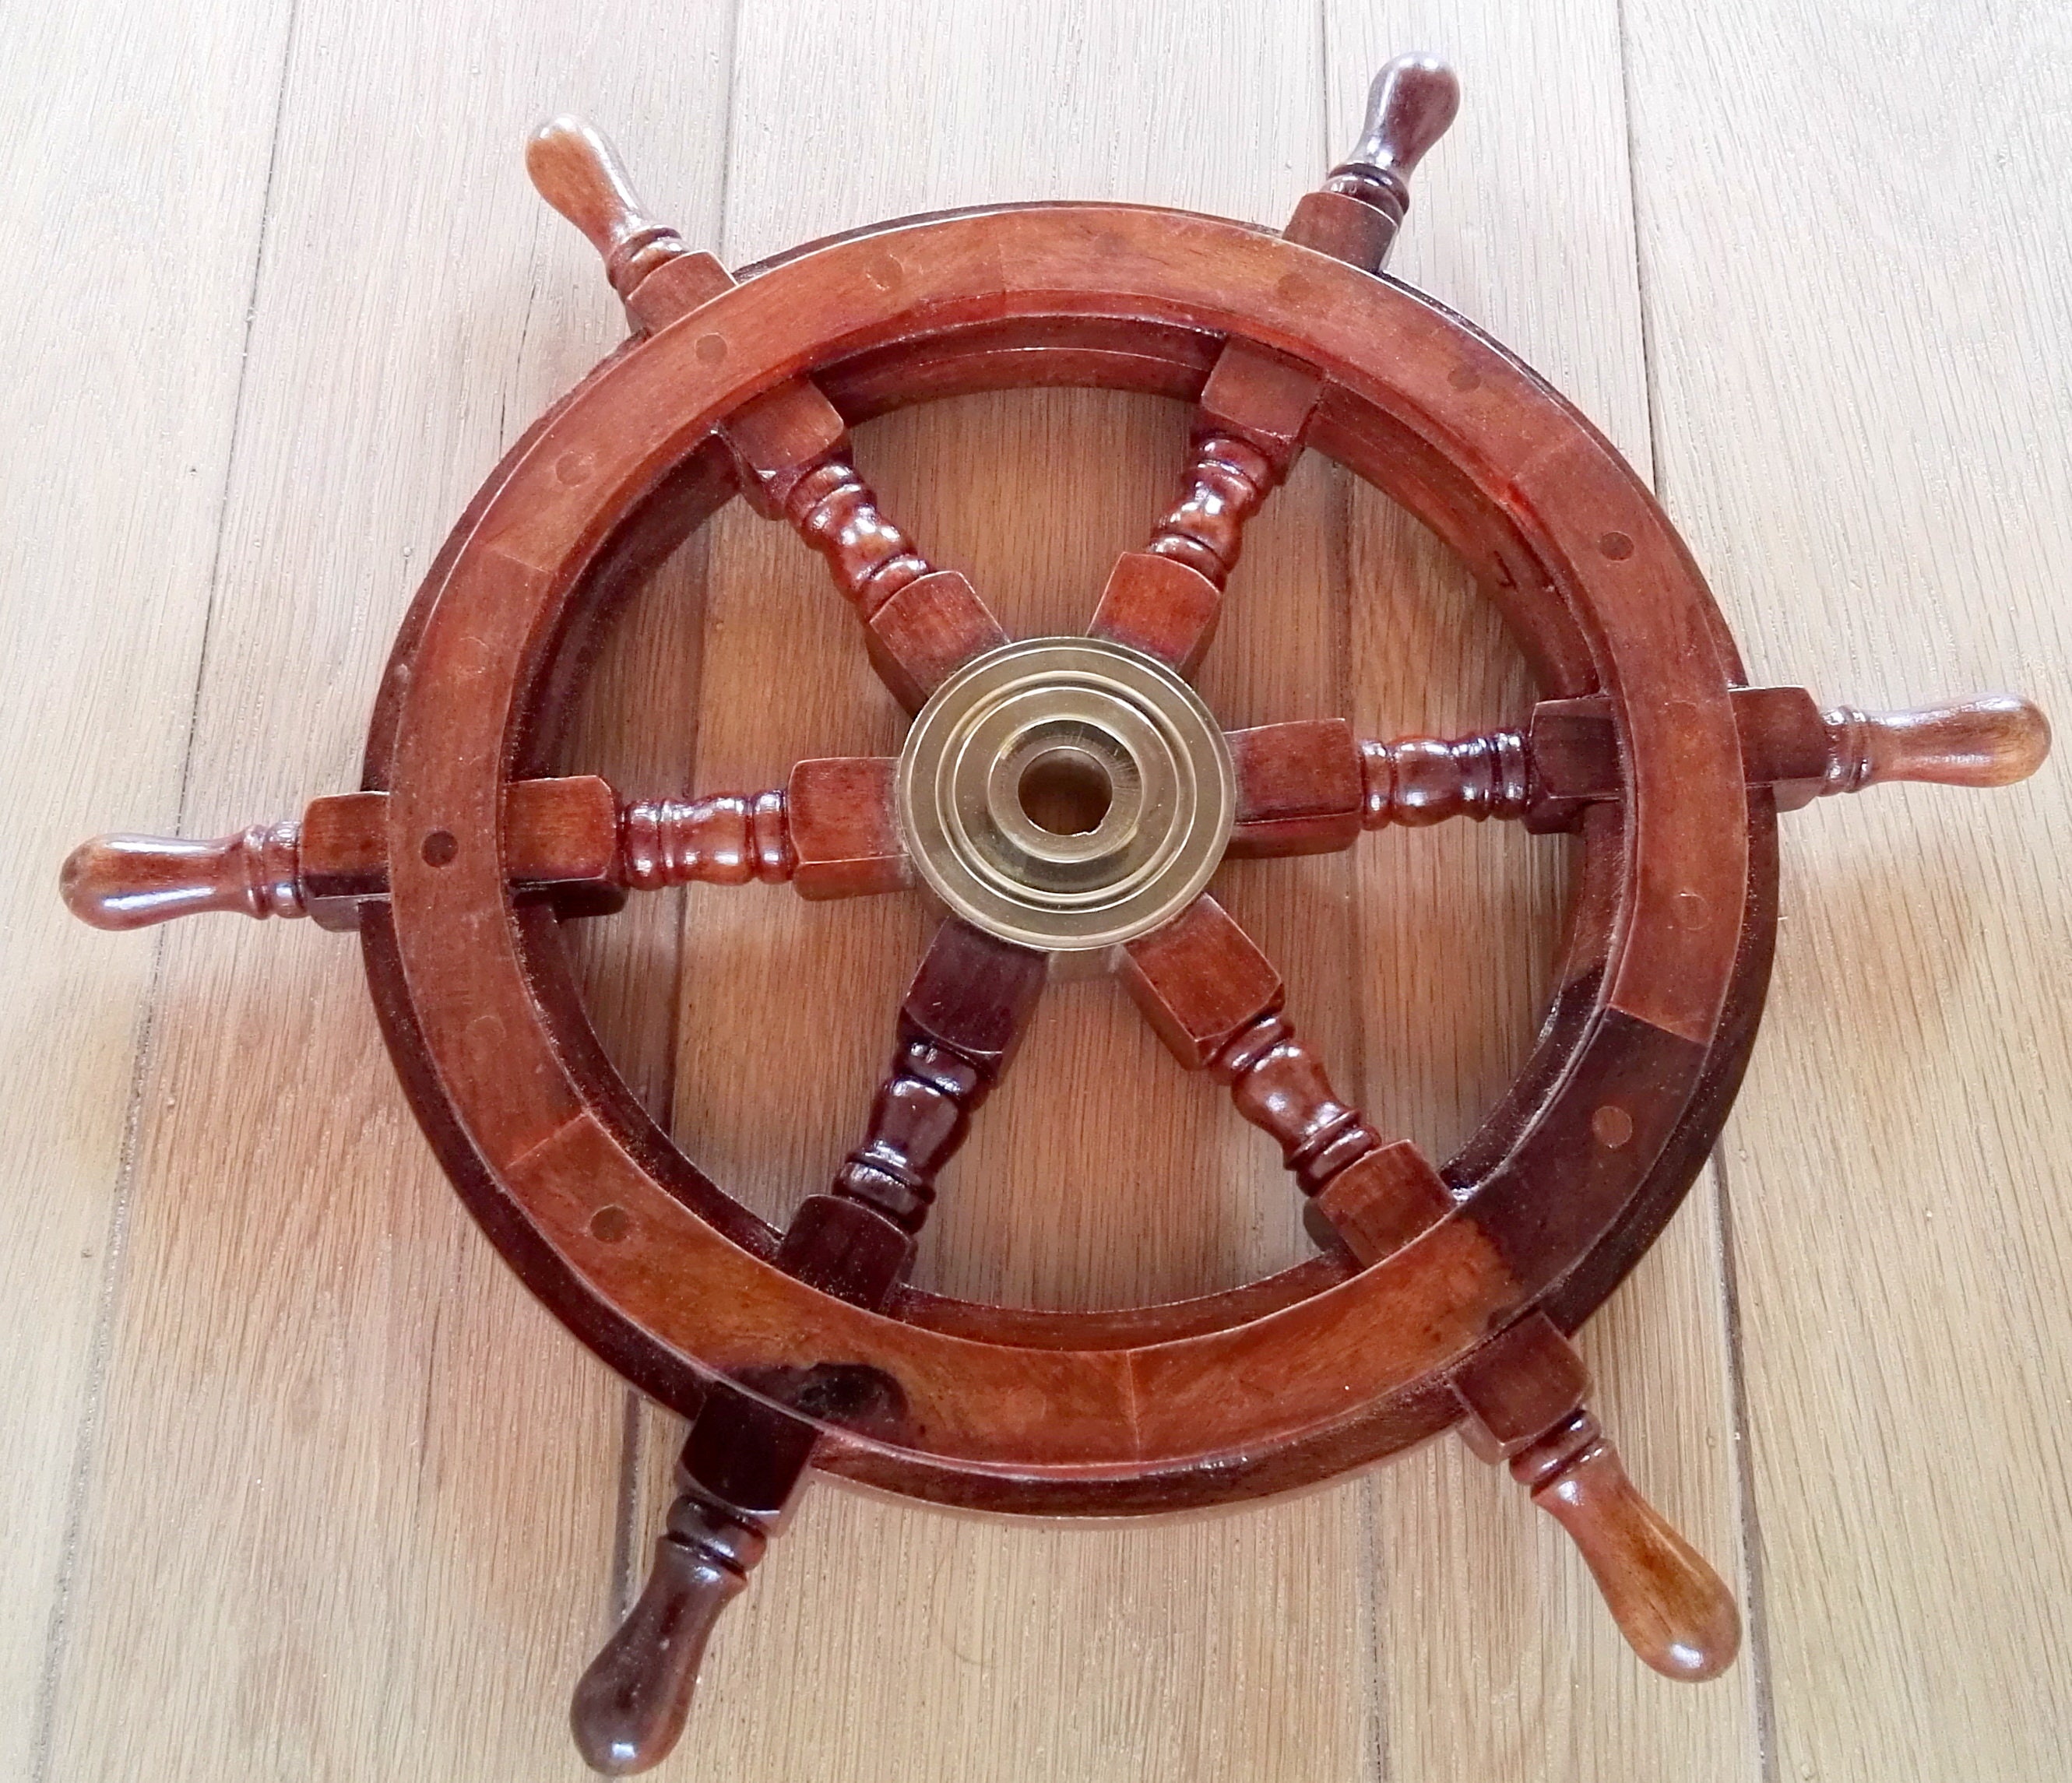 Decorative wooden steering wheel of a boat